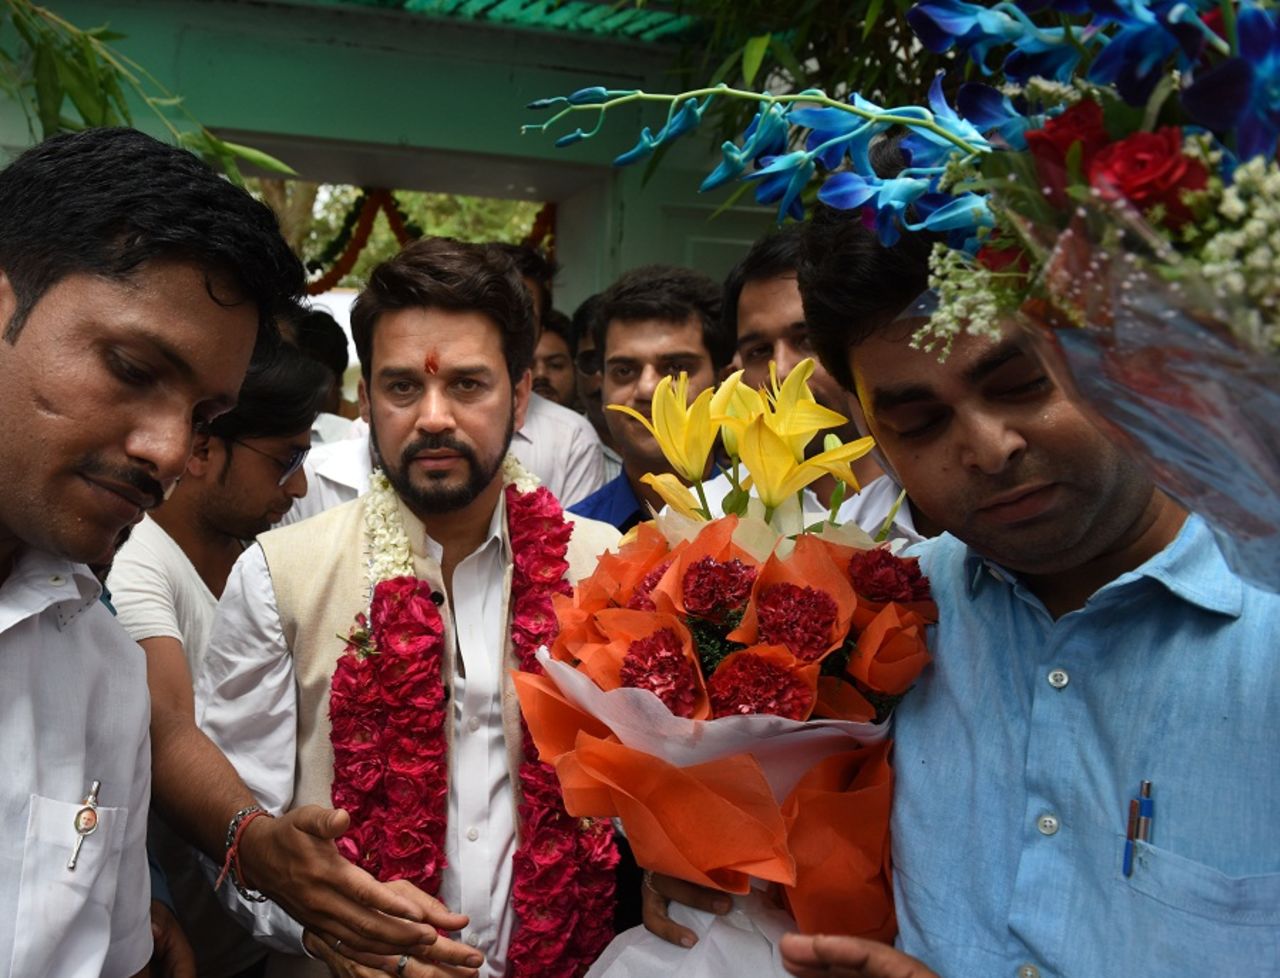 BCCI president Anurag Thakur is mobbed by his supporters at his residence in New Delhi, May 23, 2016